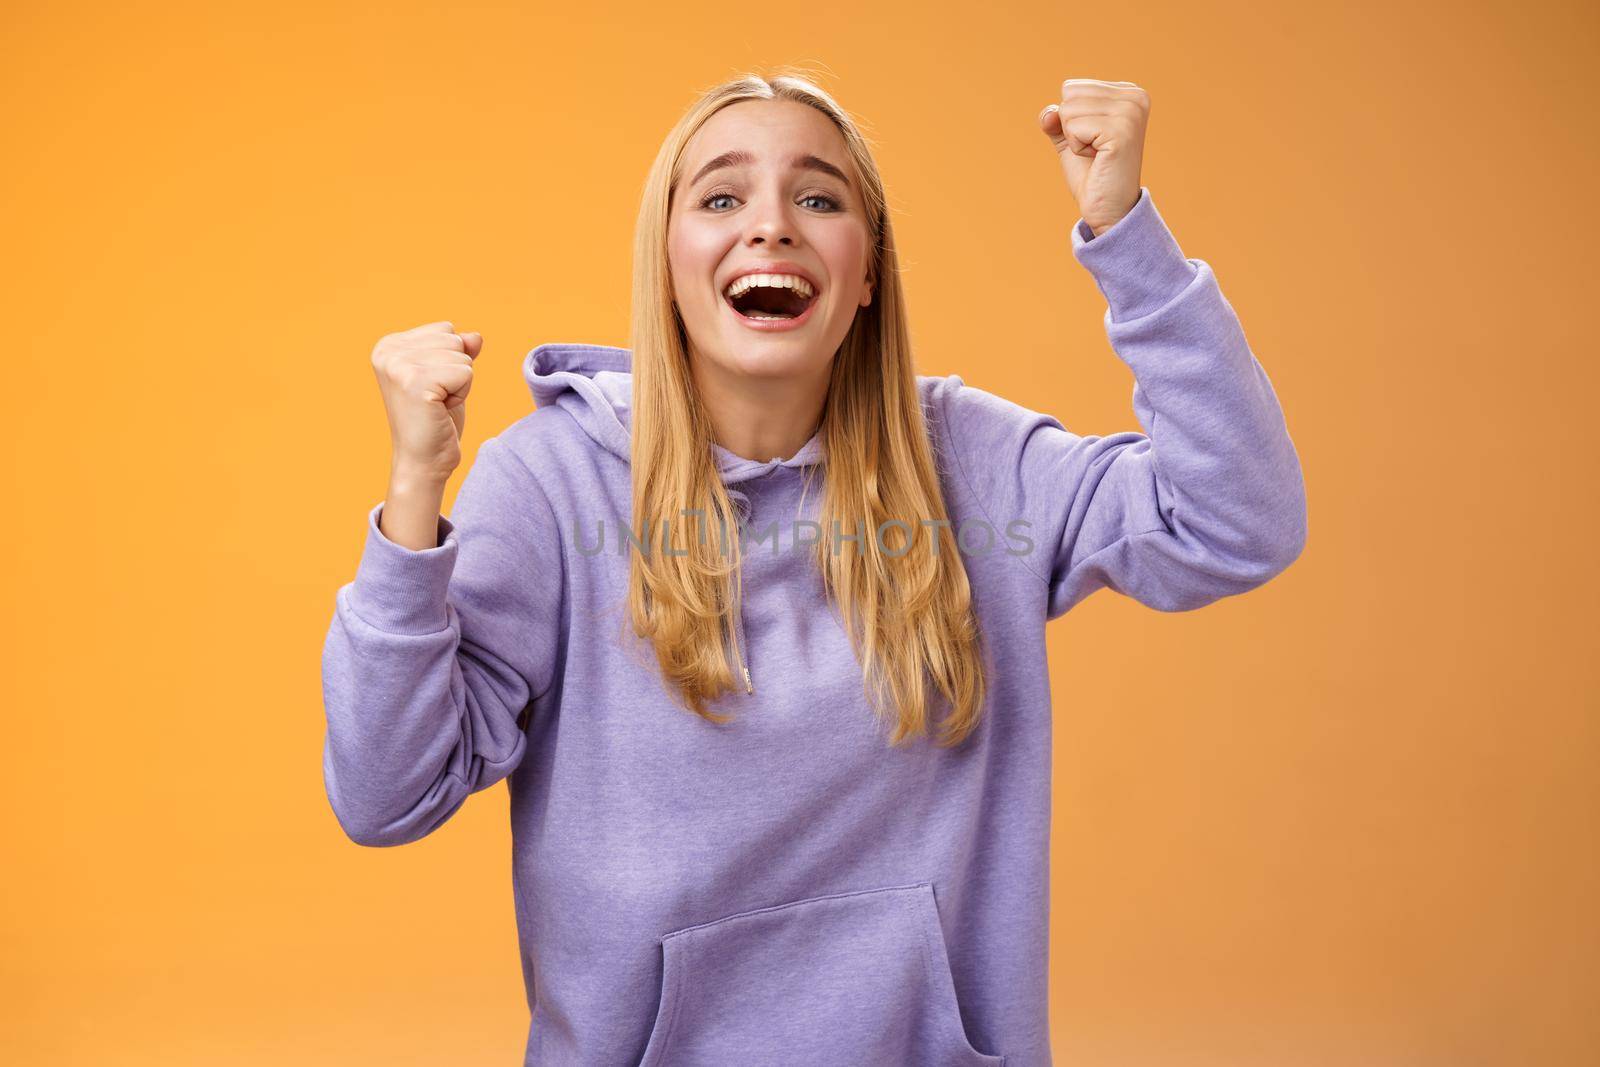 Happy cheerful young supportive woman cheering sister win smiling dedicated fun hope favorite team score goal raising clenched fists yelling happily celebrating triumphing victory, orange background.